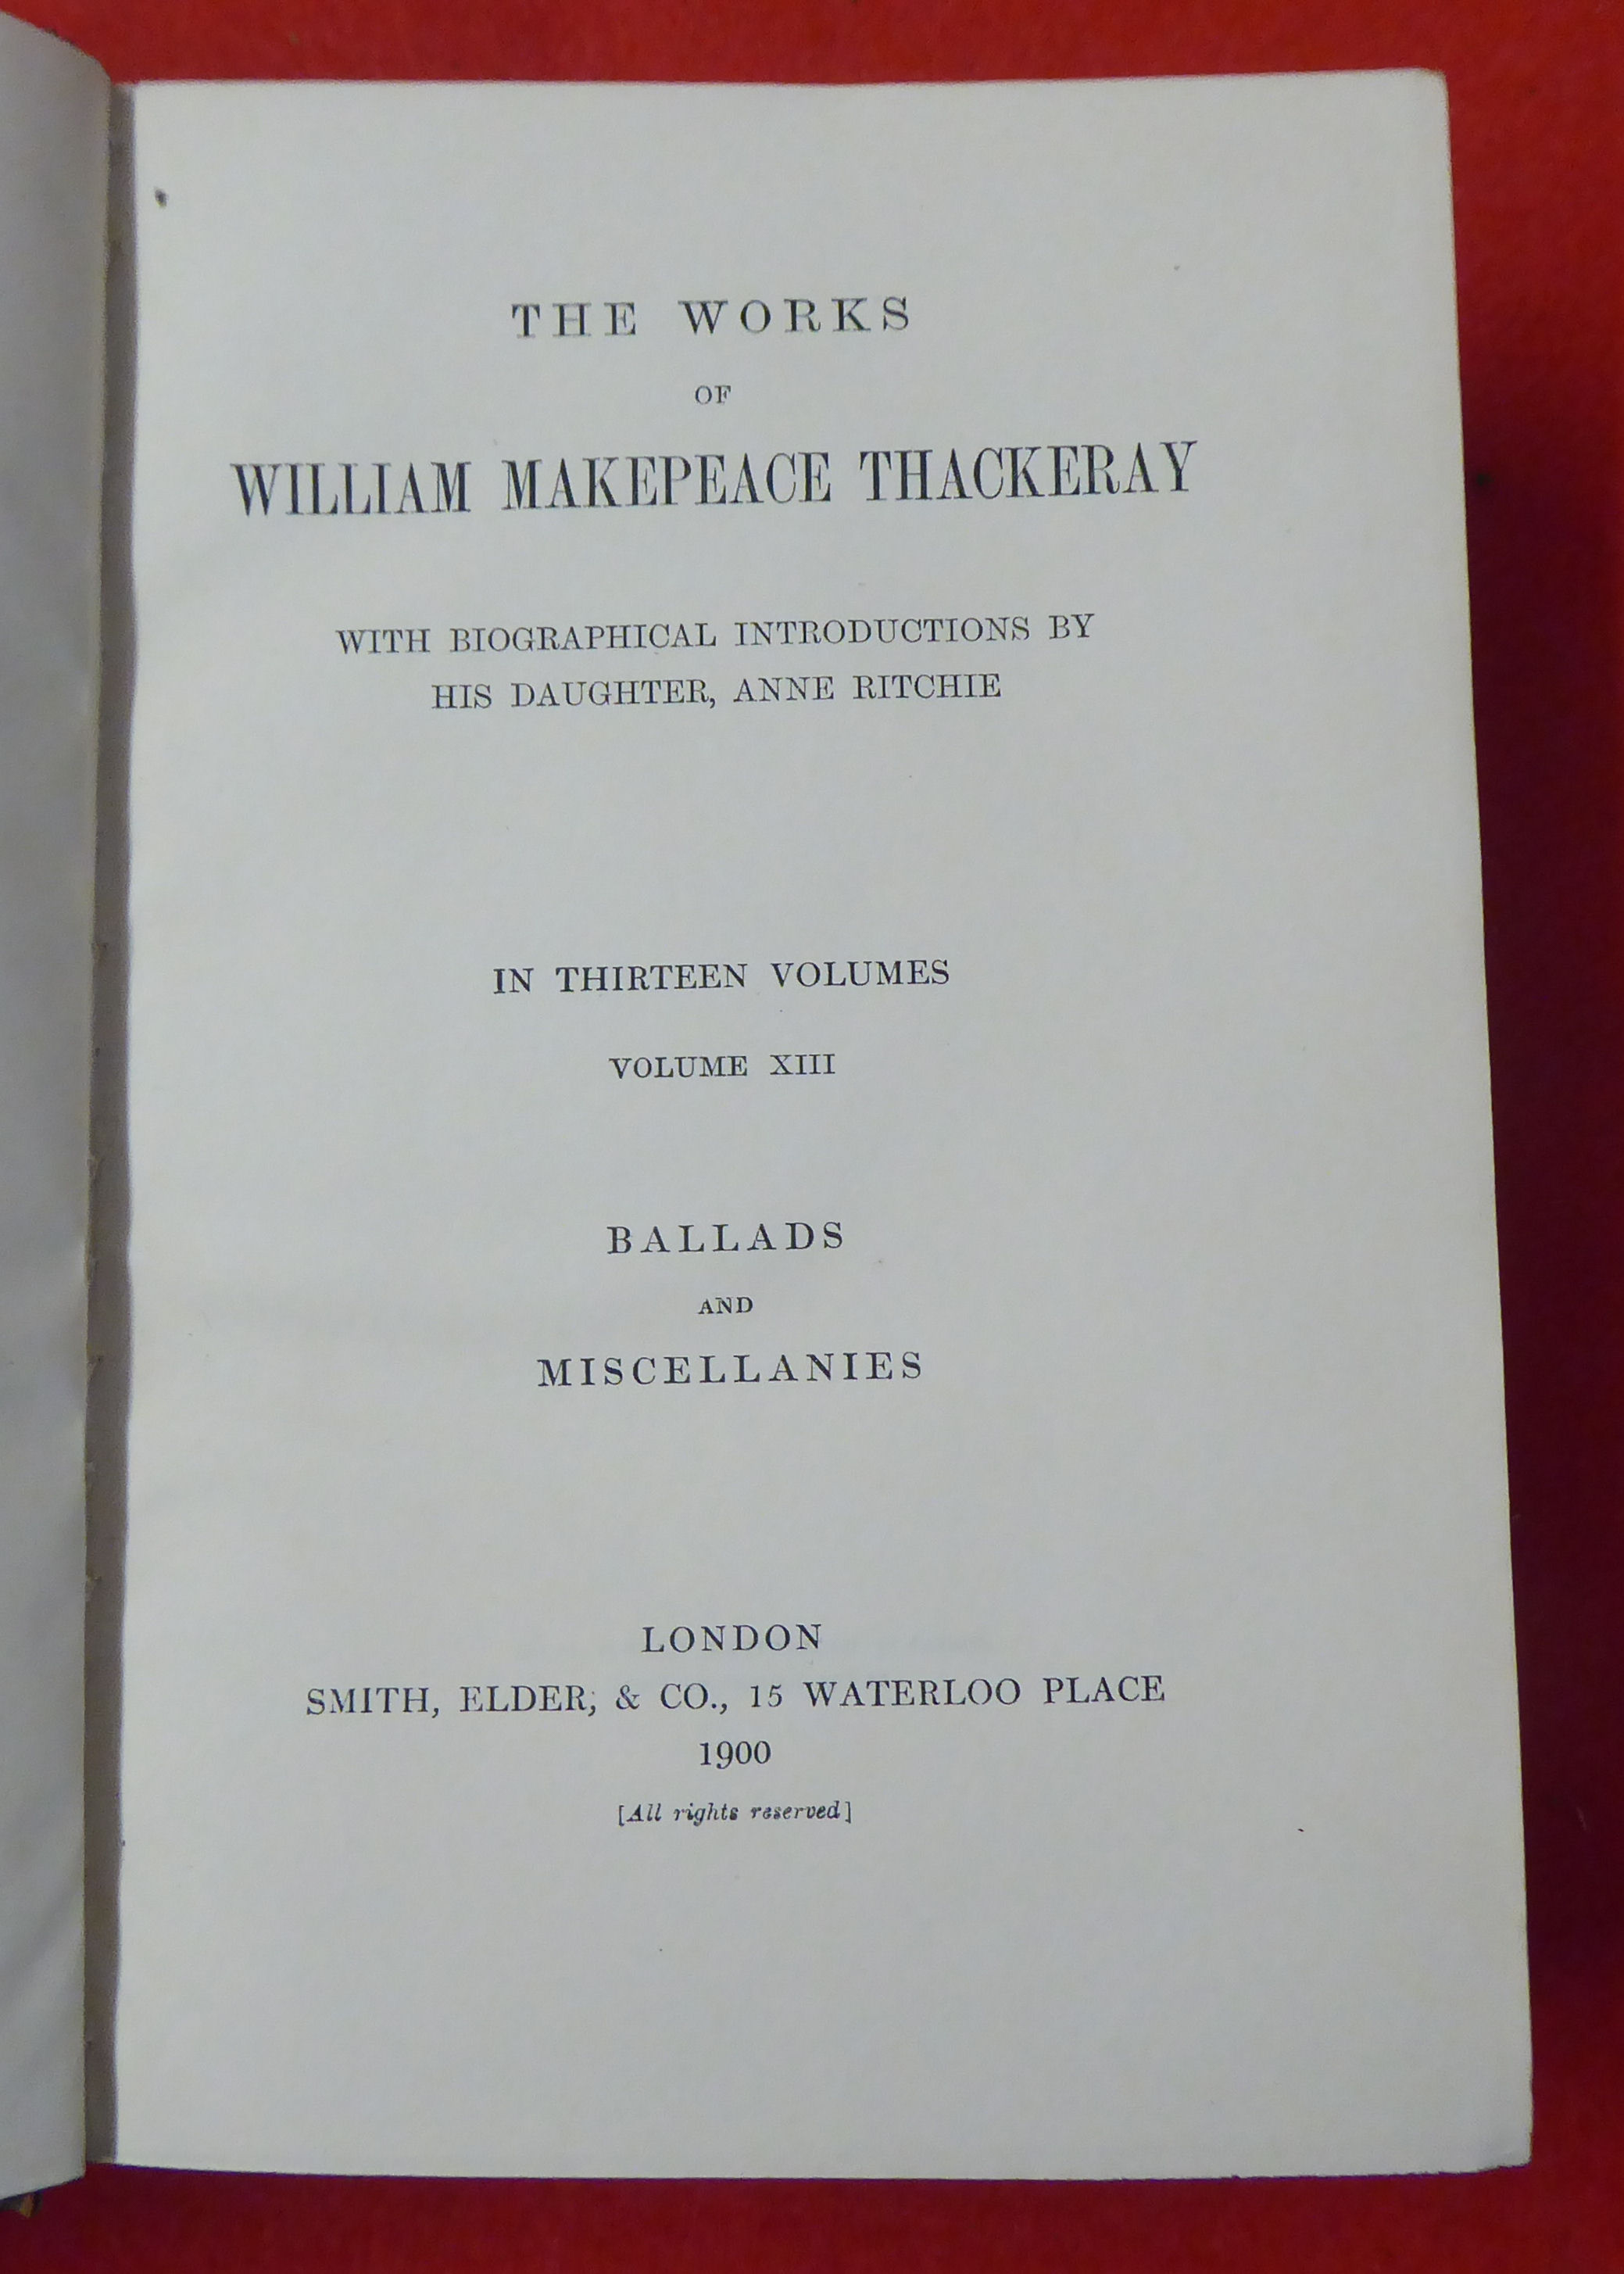 Books: 'The Works of William Makepeace Thackeray'  dated 1900, in thirteen volumes  (volume seven - Image 16 of 16